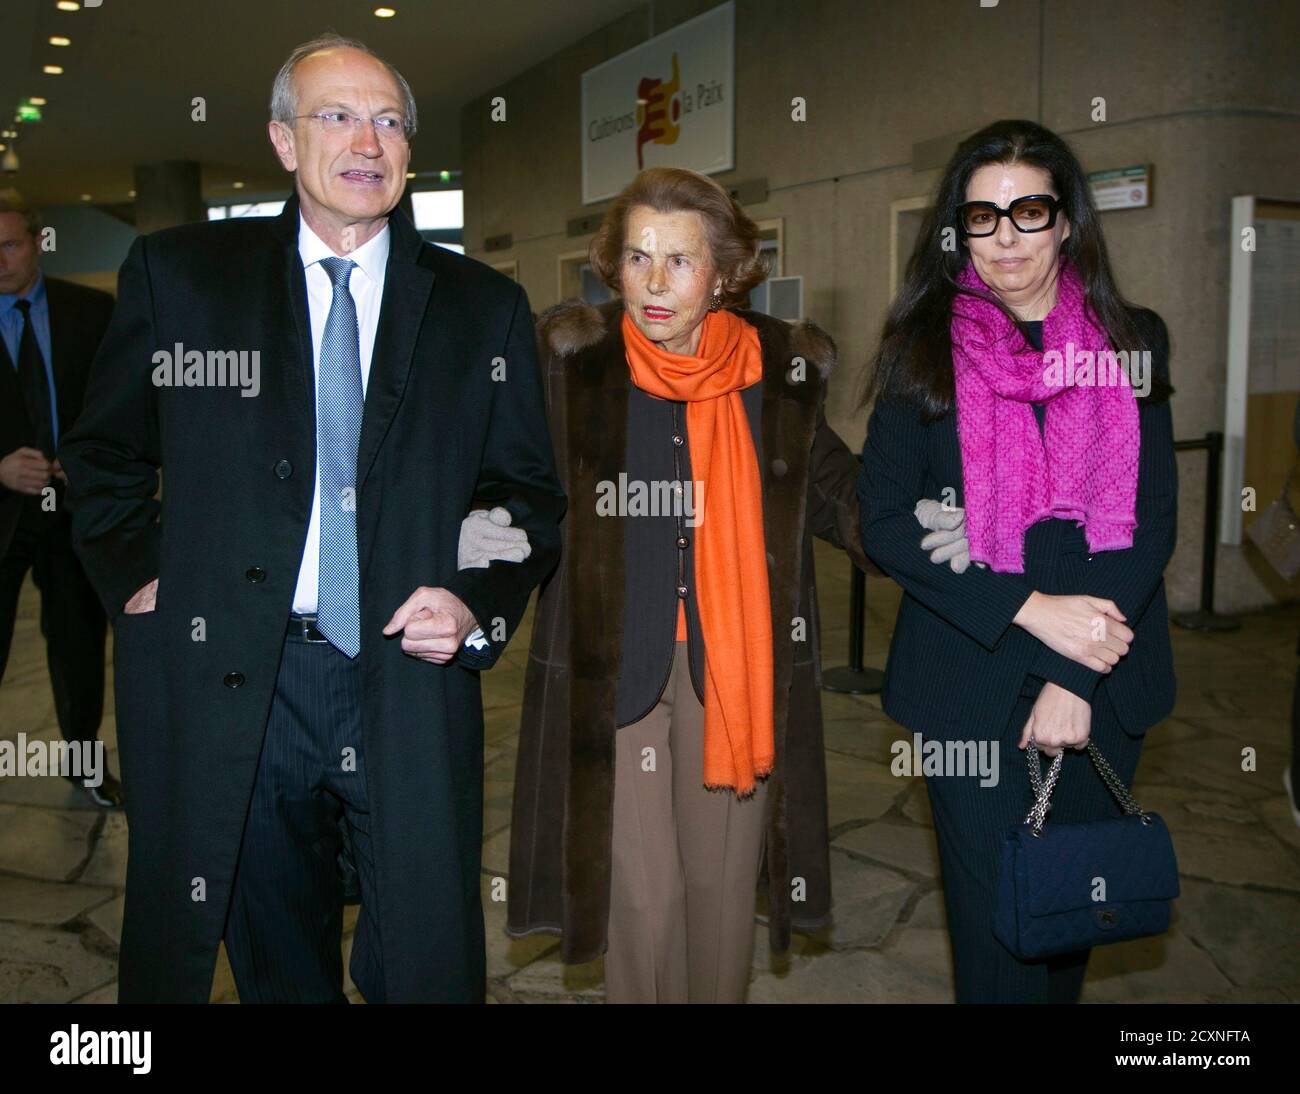 L-R) Cosmetics company L'Oreal chief executive Jean-Paul Agon, Liliane  Bettencourt, heiress to the L'Oreal fortune and her daughter Francoise  Bettencourt Meyers arrive for the L'Oreal-UNESCO prize for women in Paris,  March 3,